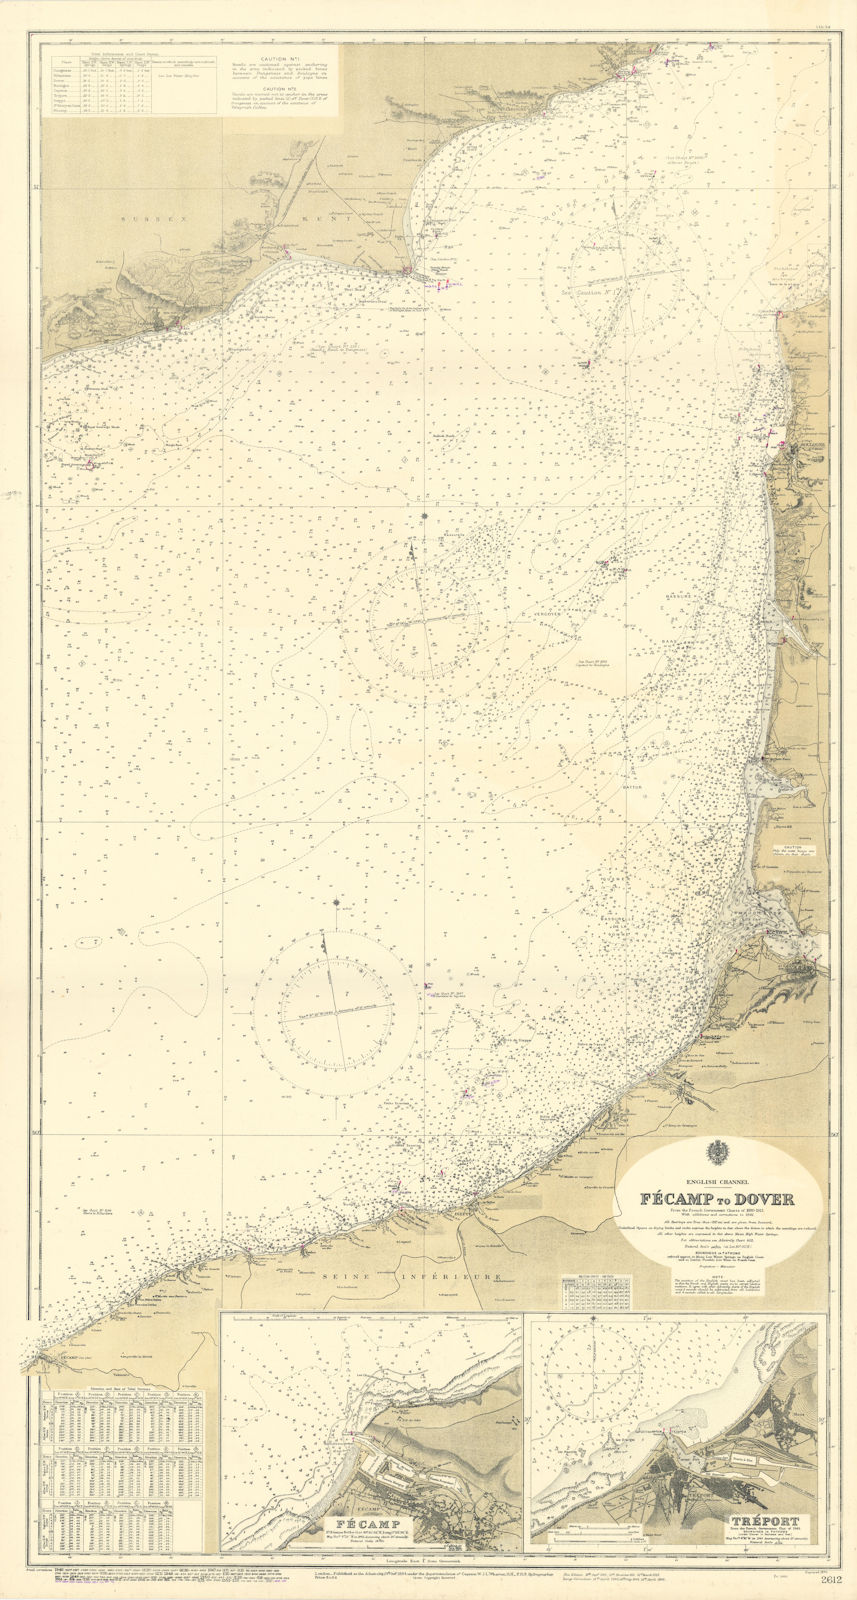 English Channel Fécamp-Dover Sussex Tréport. ADMIRALTY sea chart 1894 (1954) map